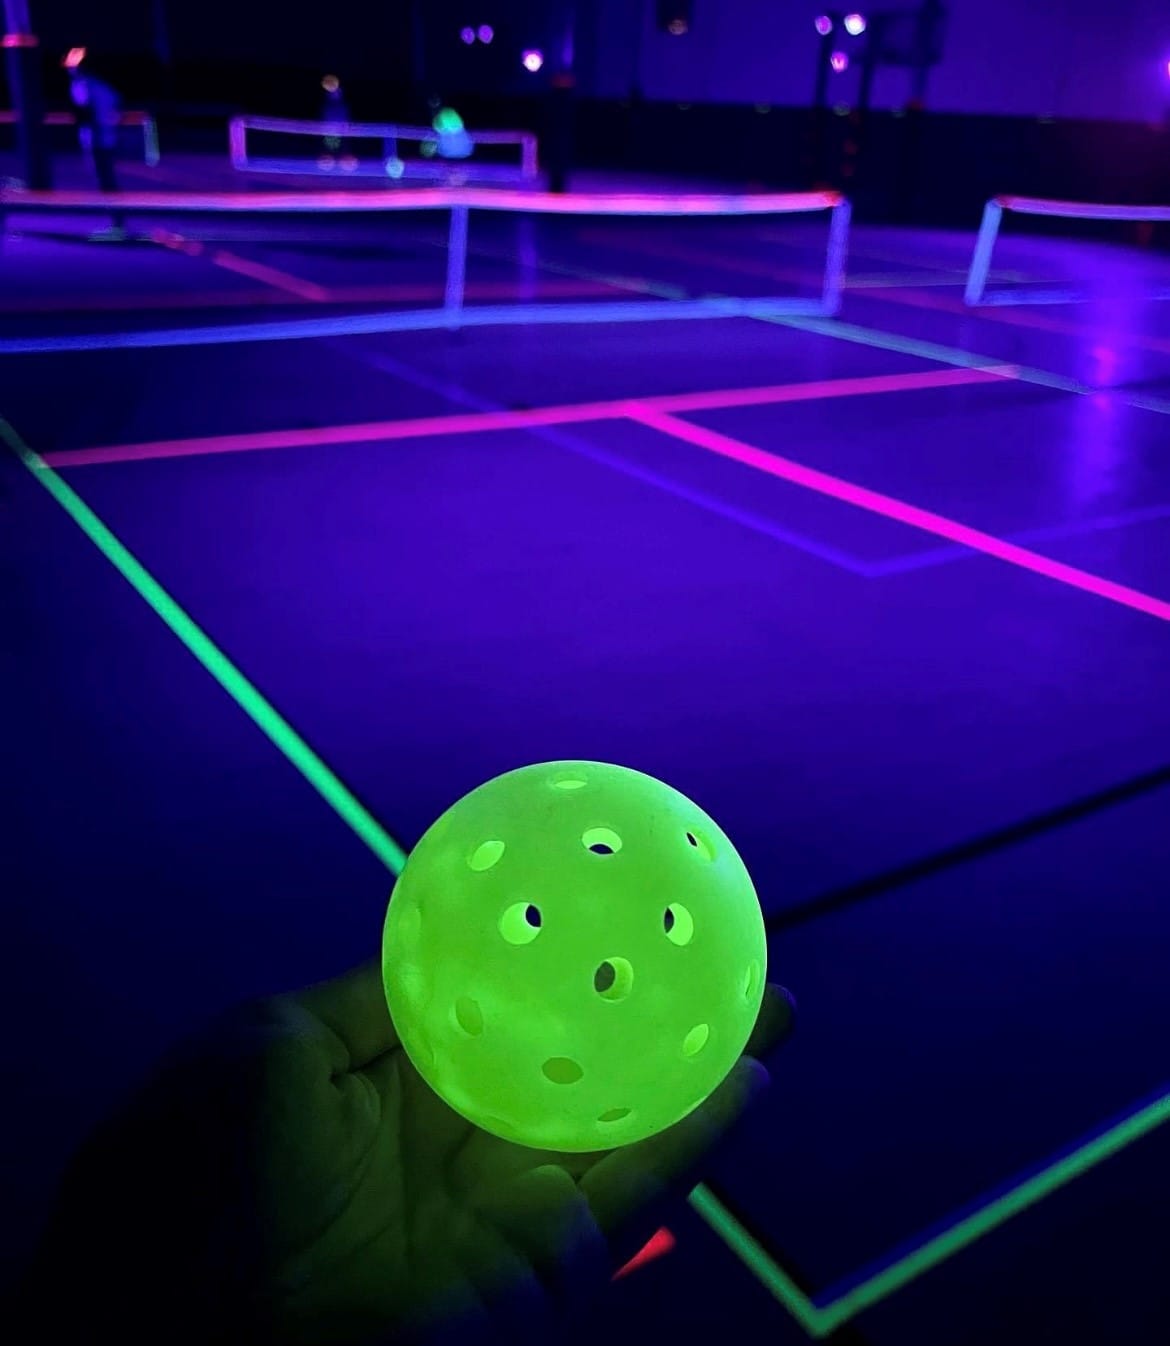 50+ Teams Signed Up so far for Super Dink: Glow in the Dark Pickleball Tournament Feb 3rd!  Sign Up Today and Join the Fun!